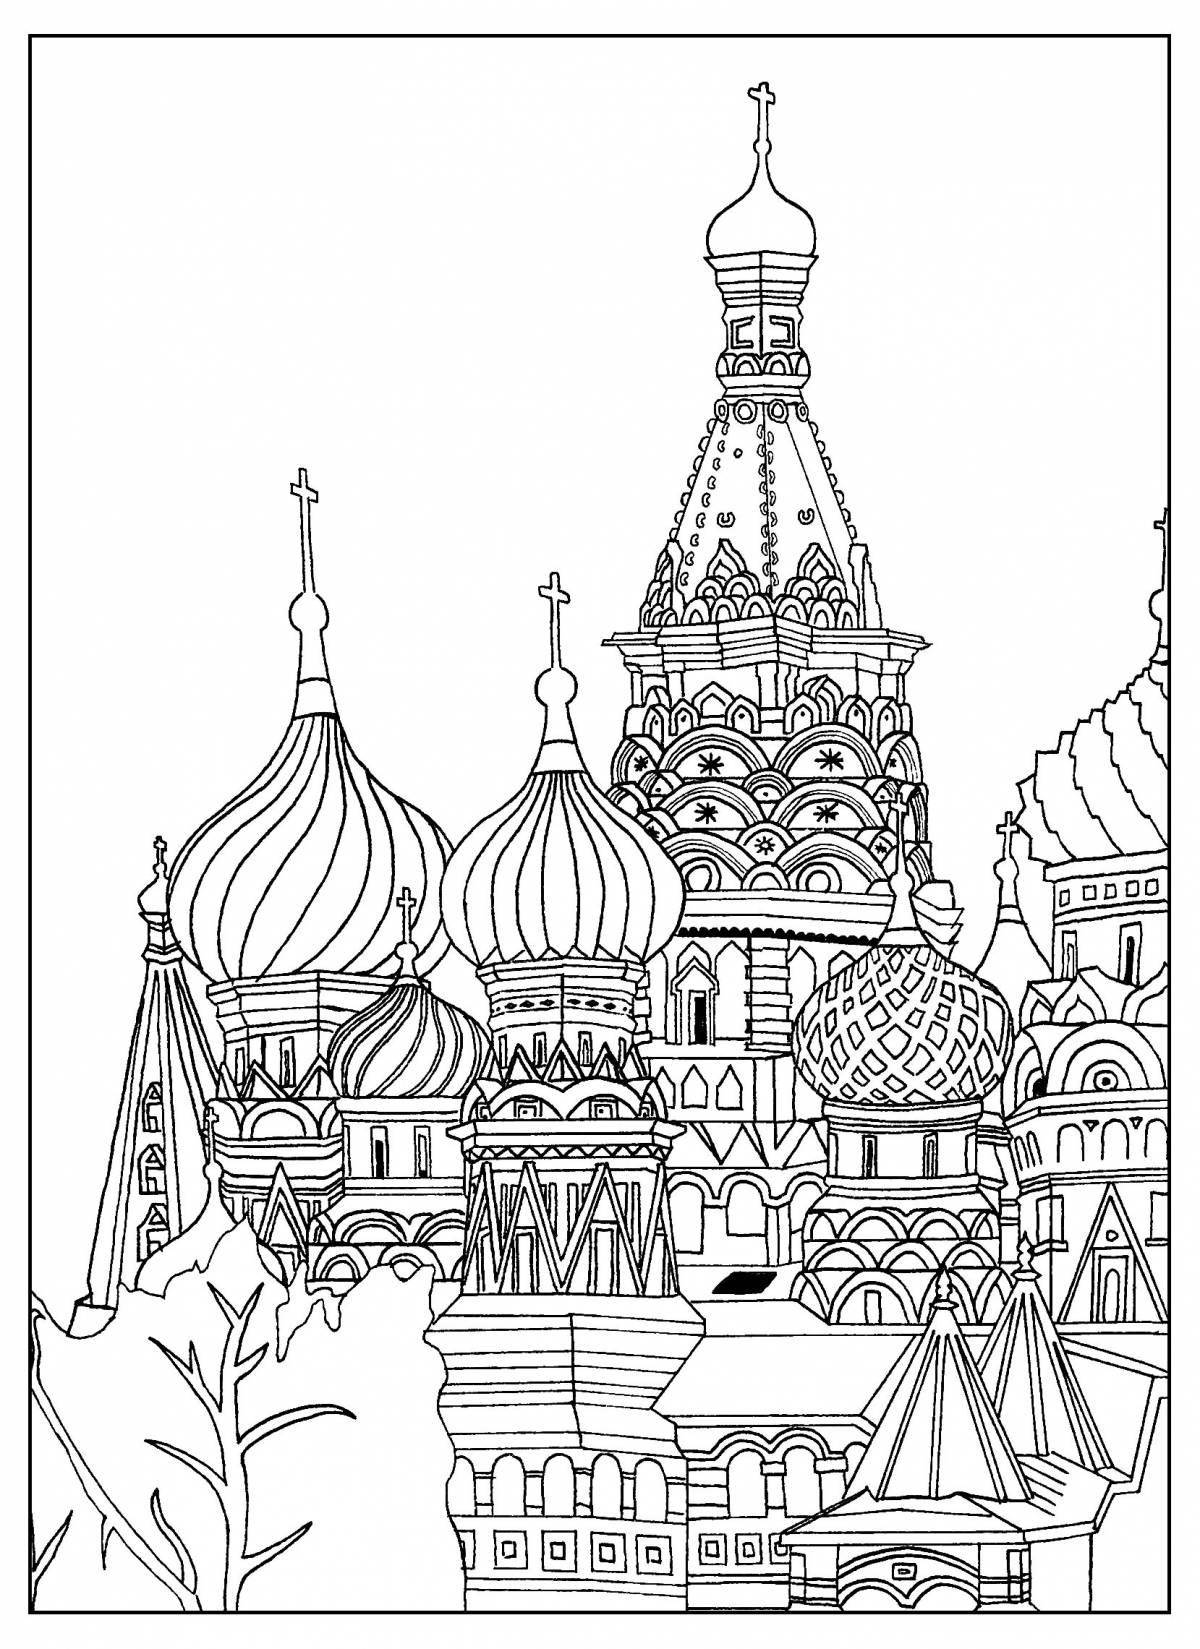 Amazing coloring pages sights of Russia